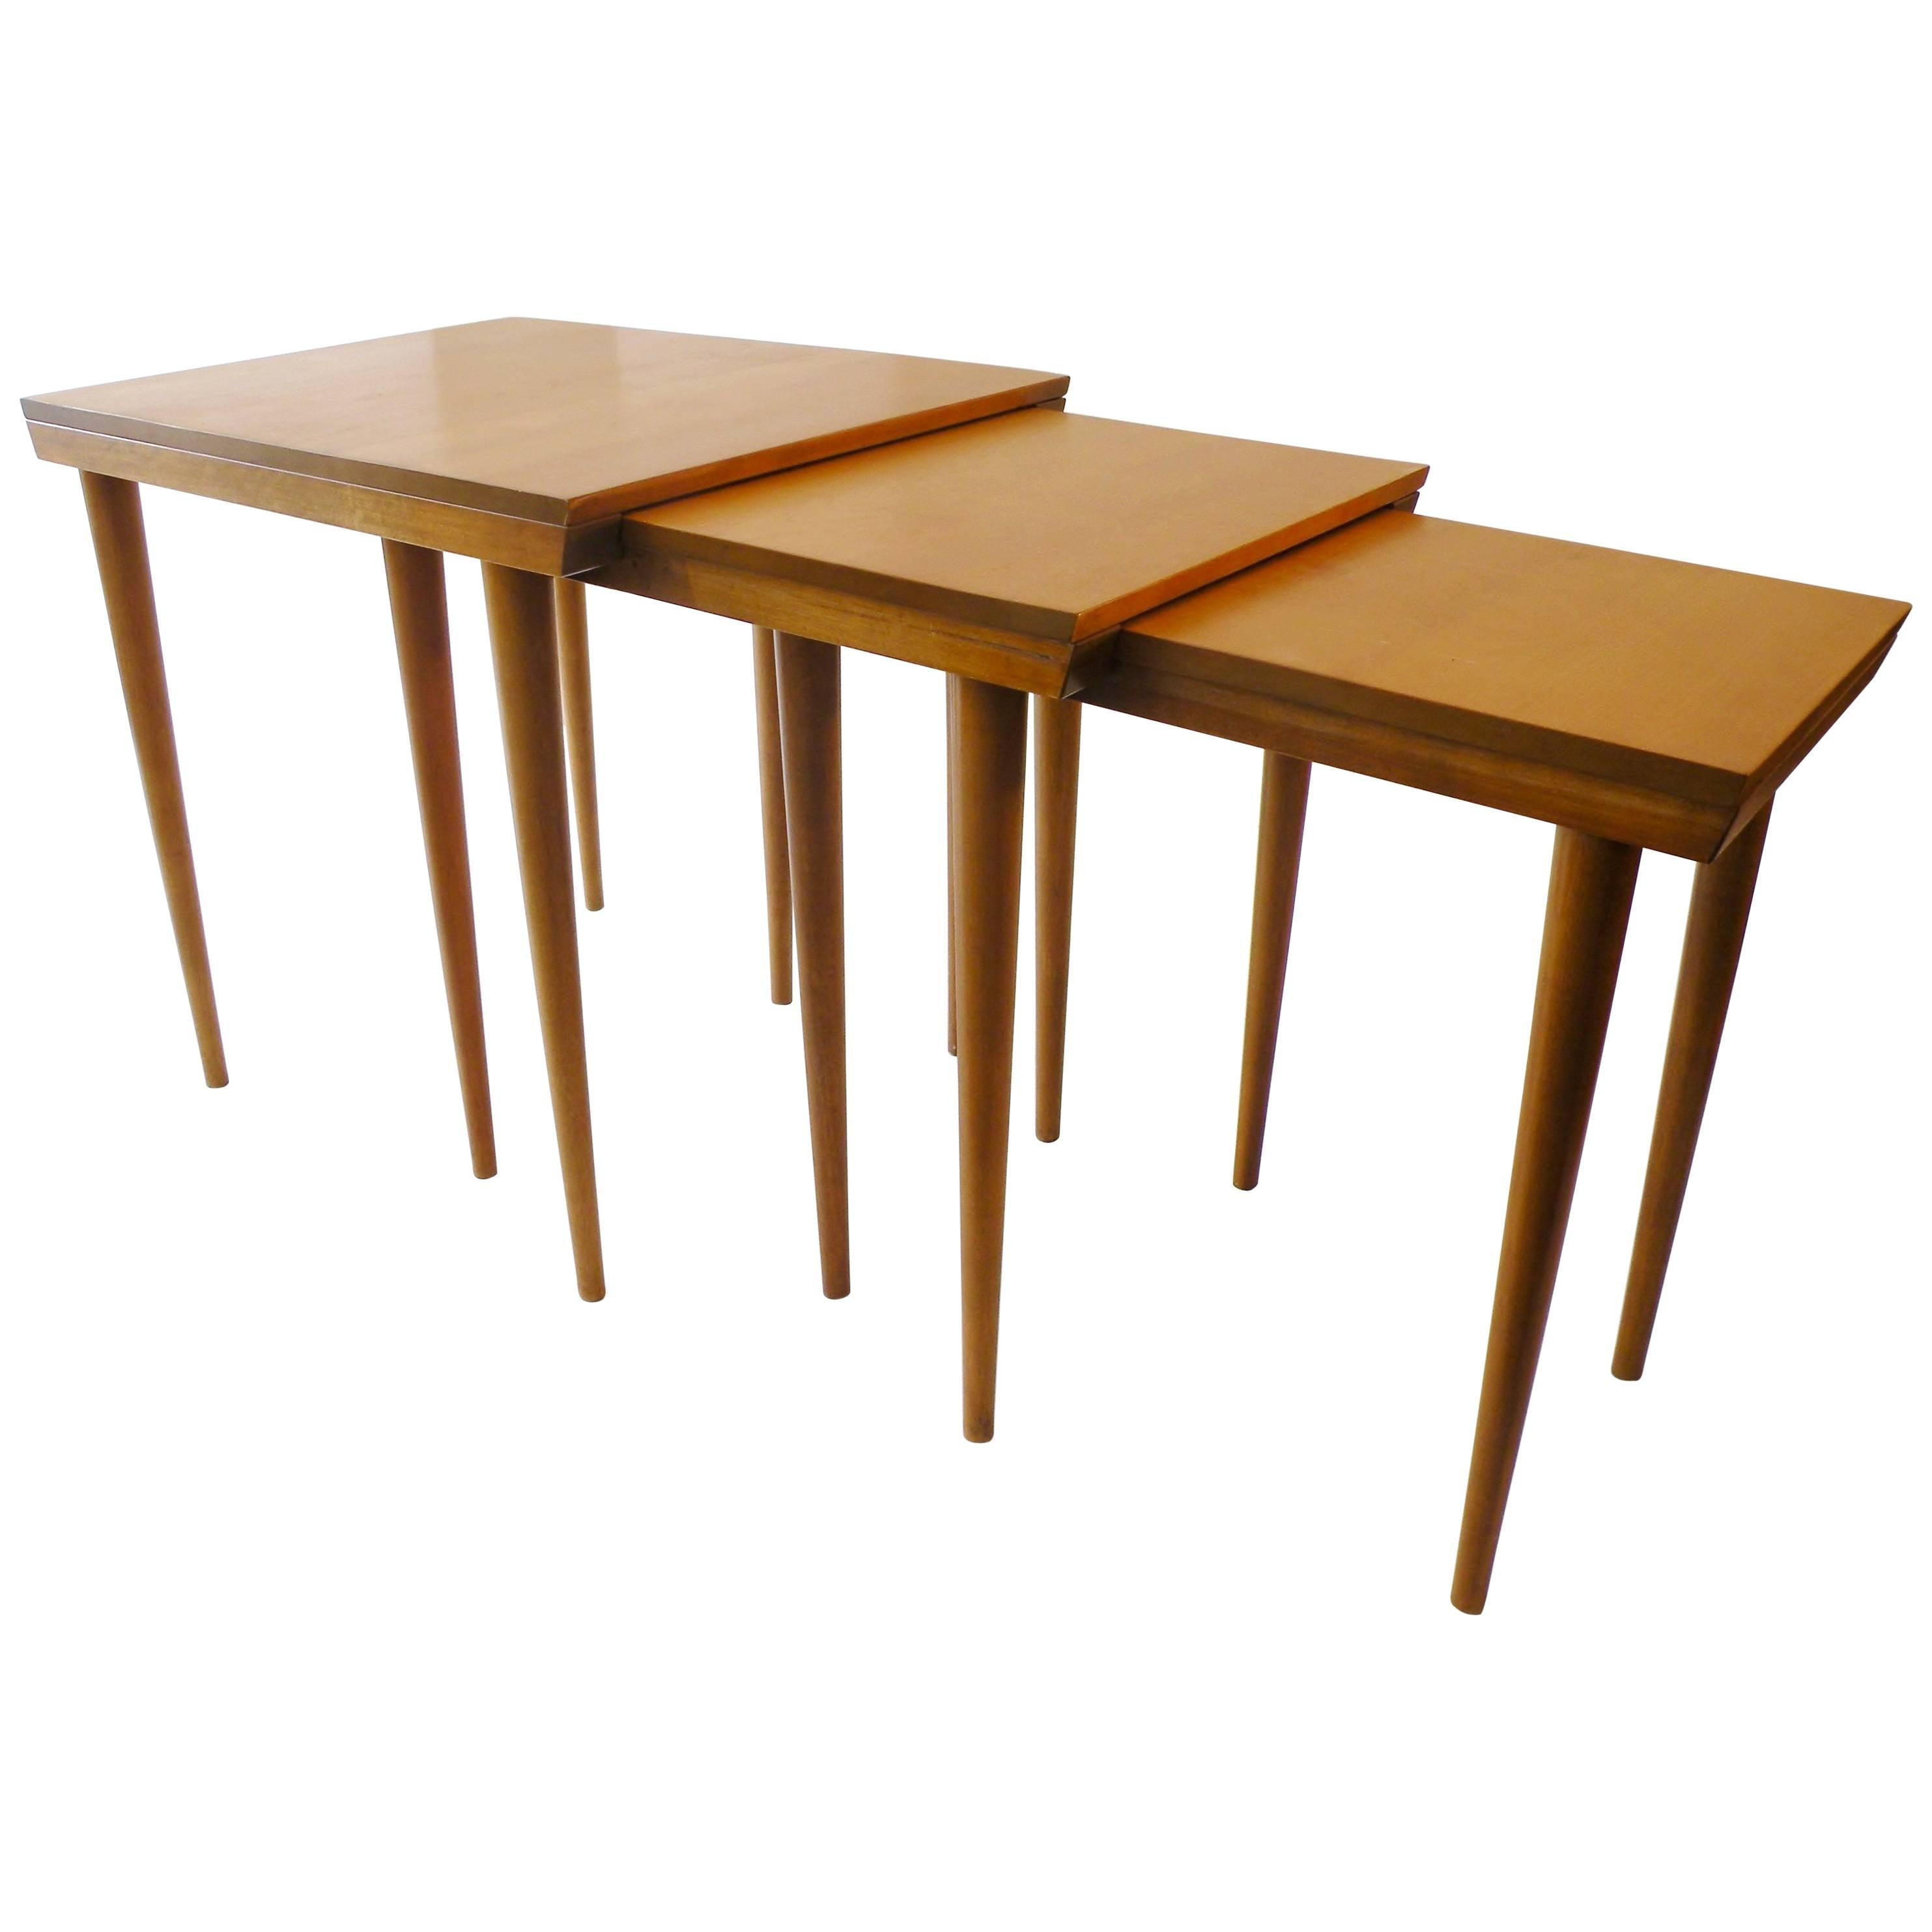 Russel Wright for Conant Ball "American Modern" Trio Nesting Tables